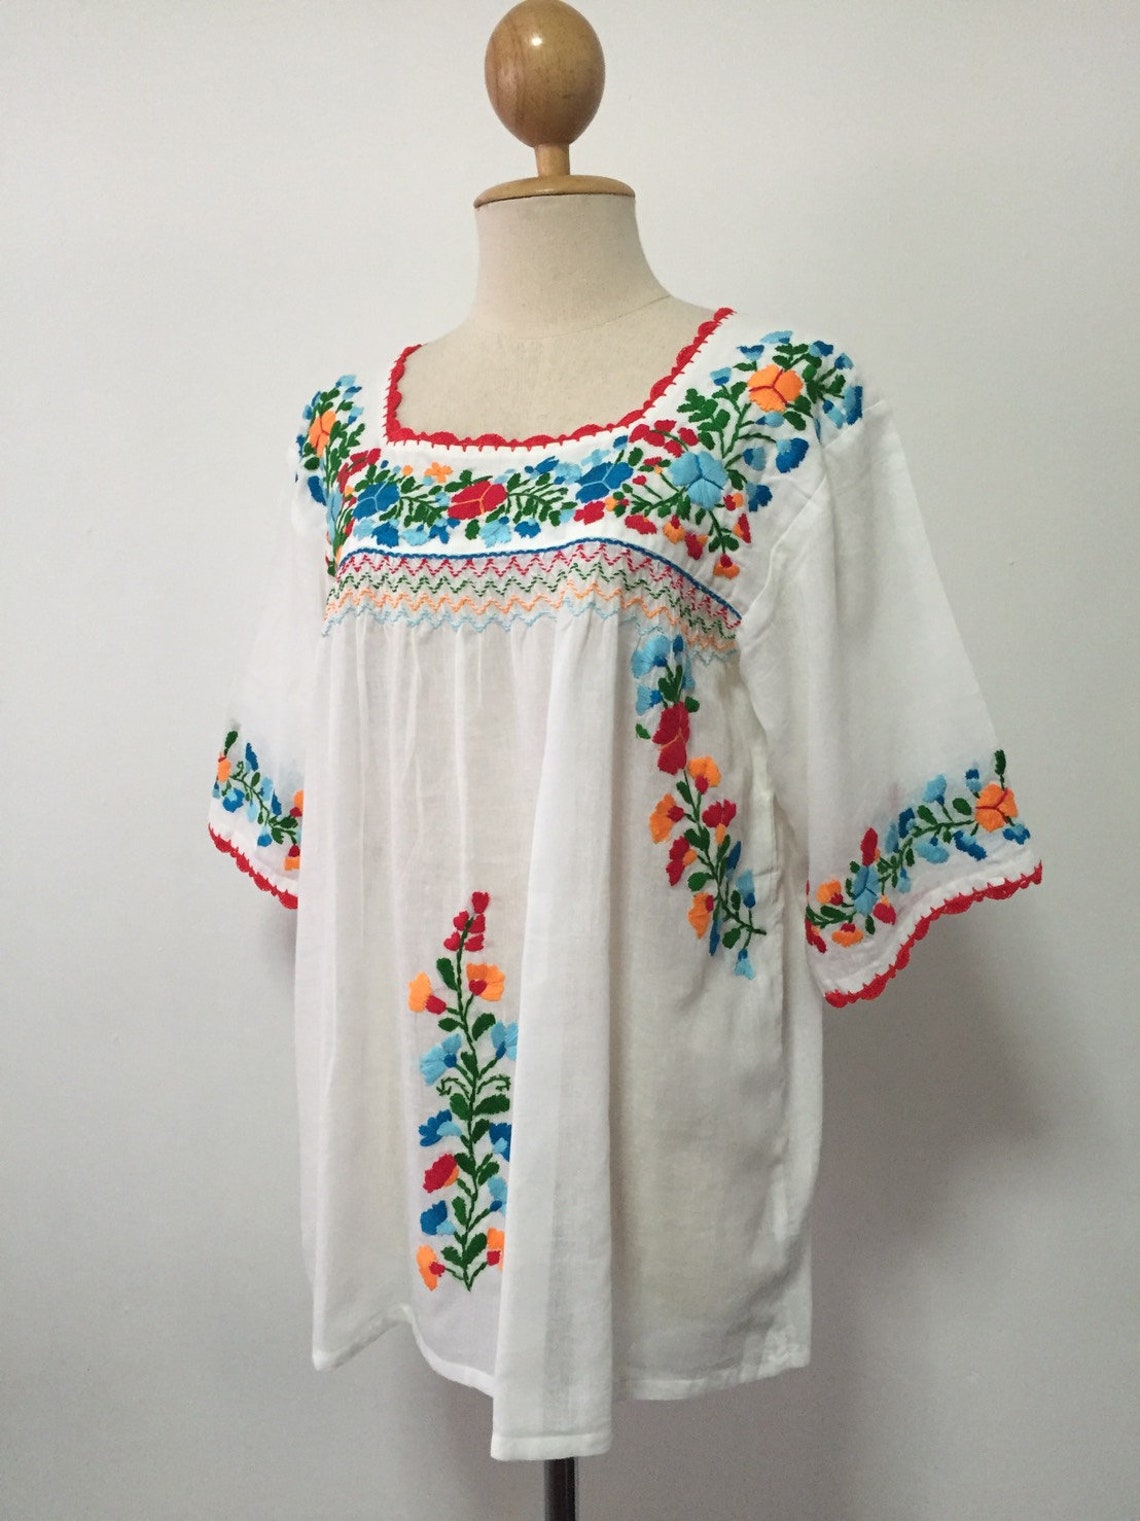 Embroidered Mexican Blouse White Cotton Top Boho Blouse Hippie | Etsy